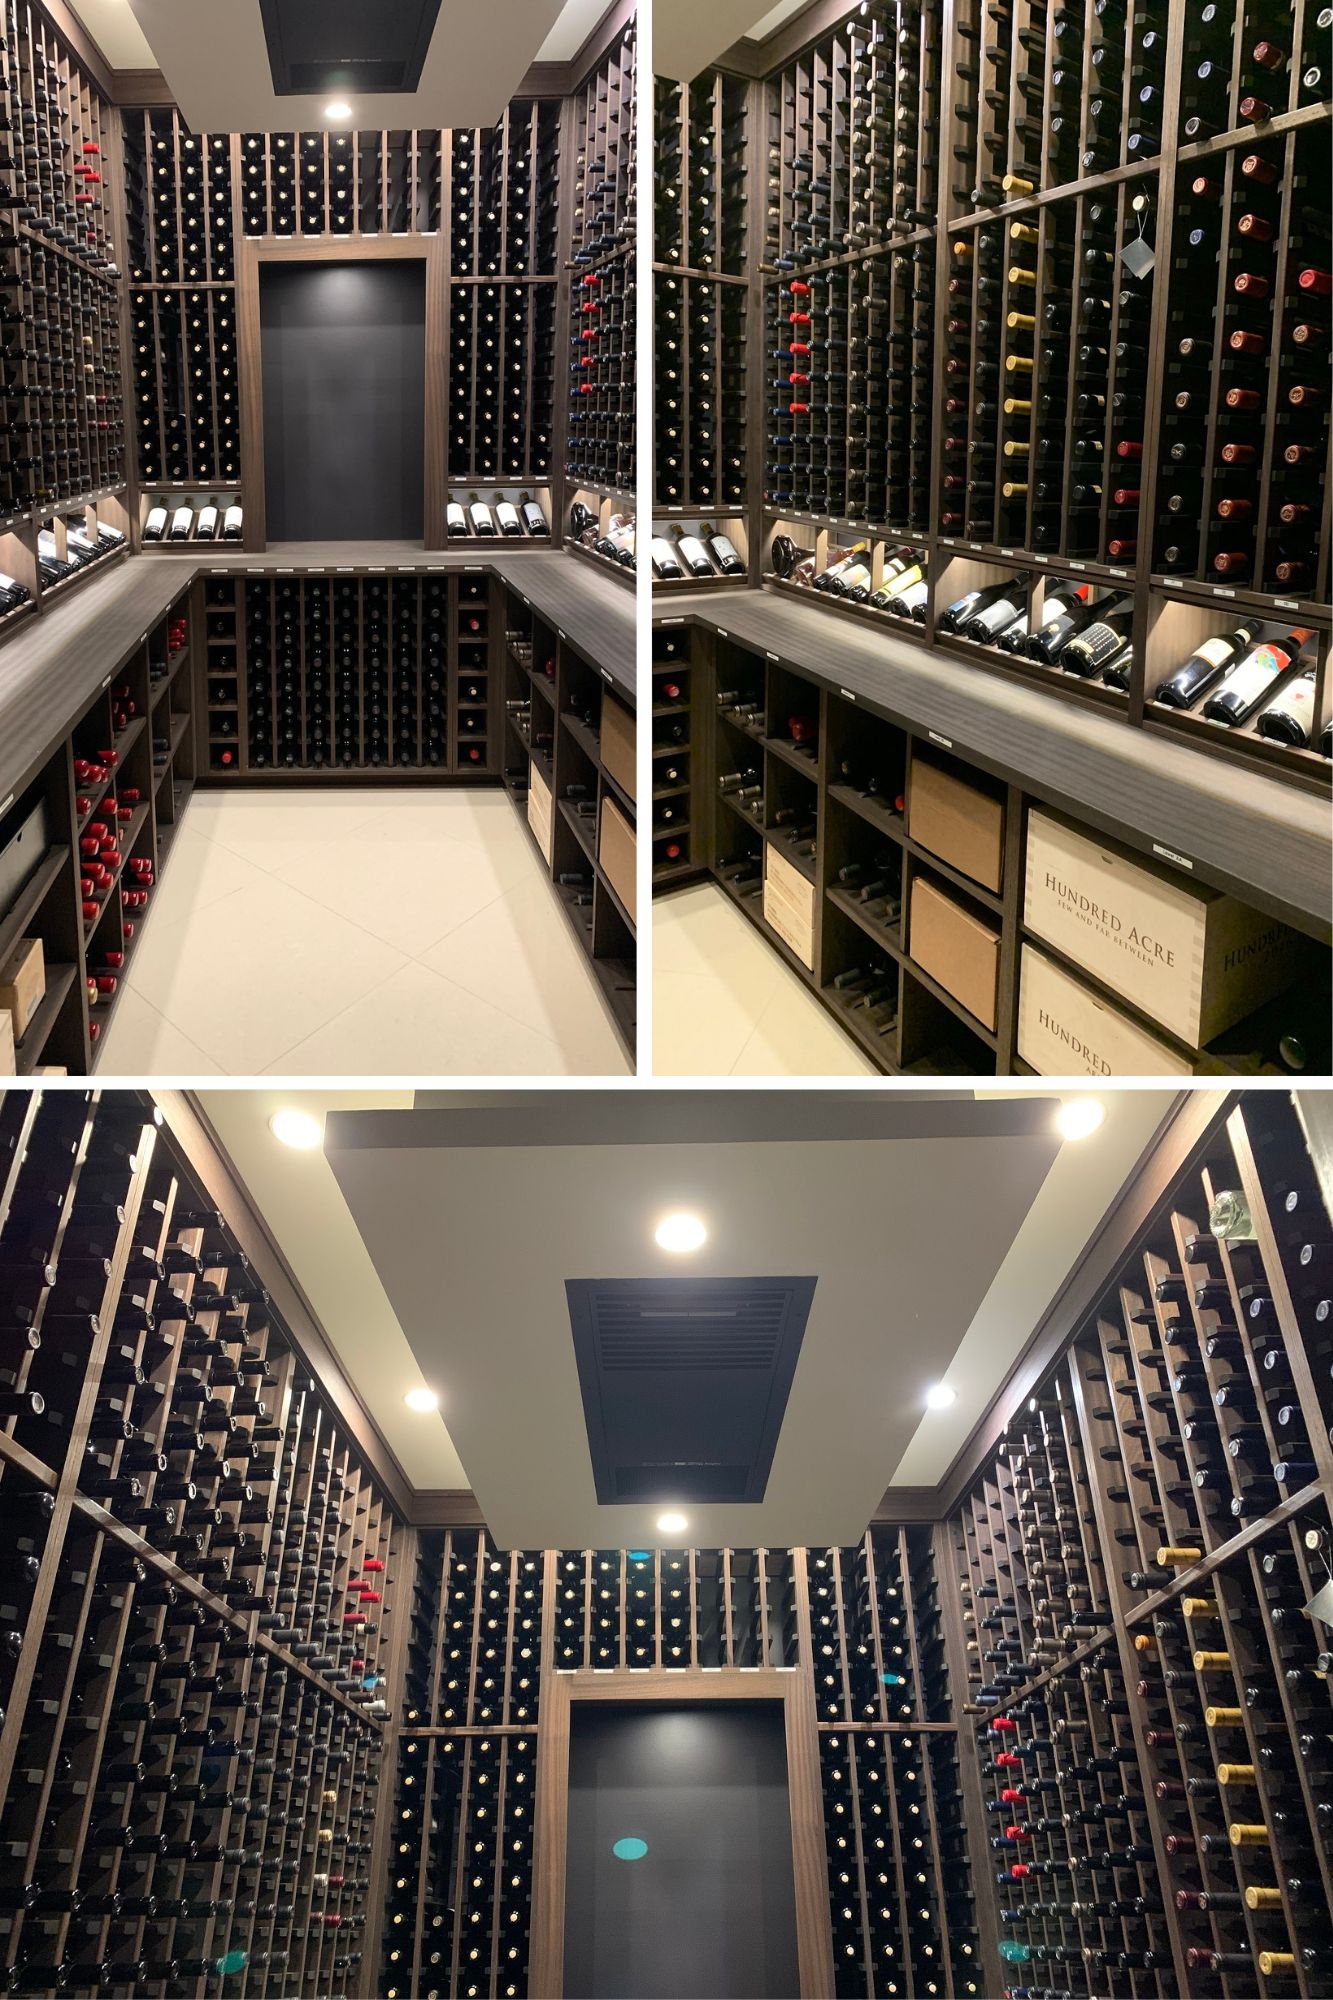 This project, which you can find on our portfolio page, is quite the contrast to our client's final project whose cellar ended up much lighter in color. Click to go see more images from the original inspired project.